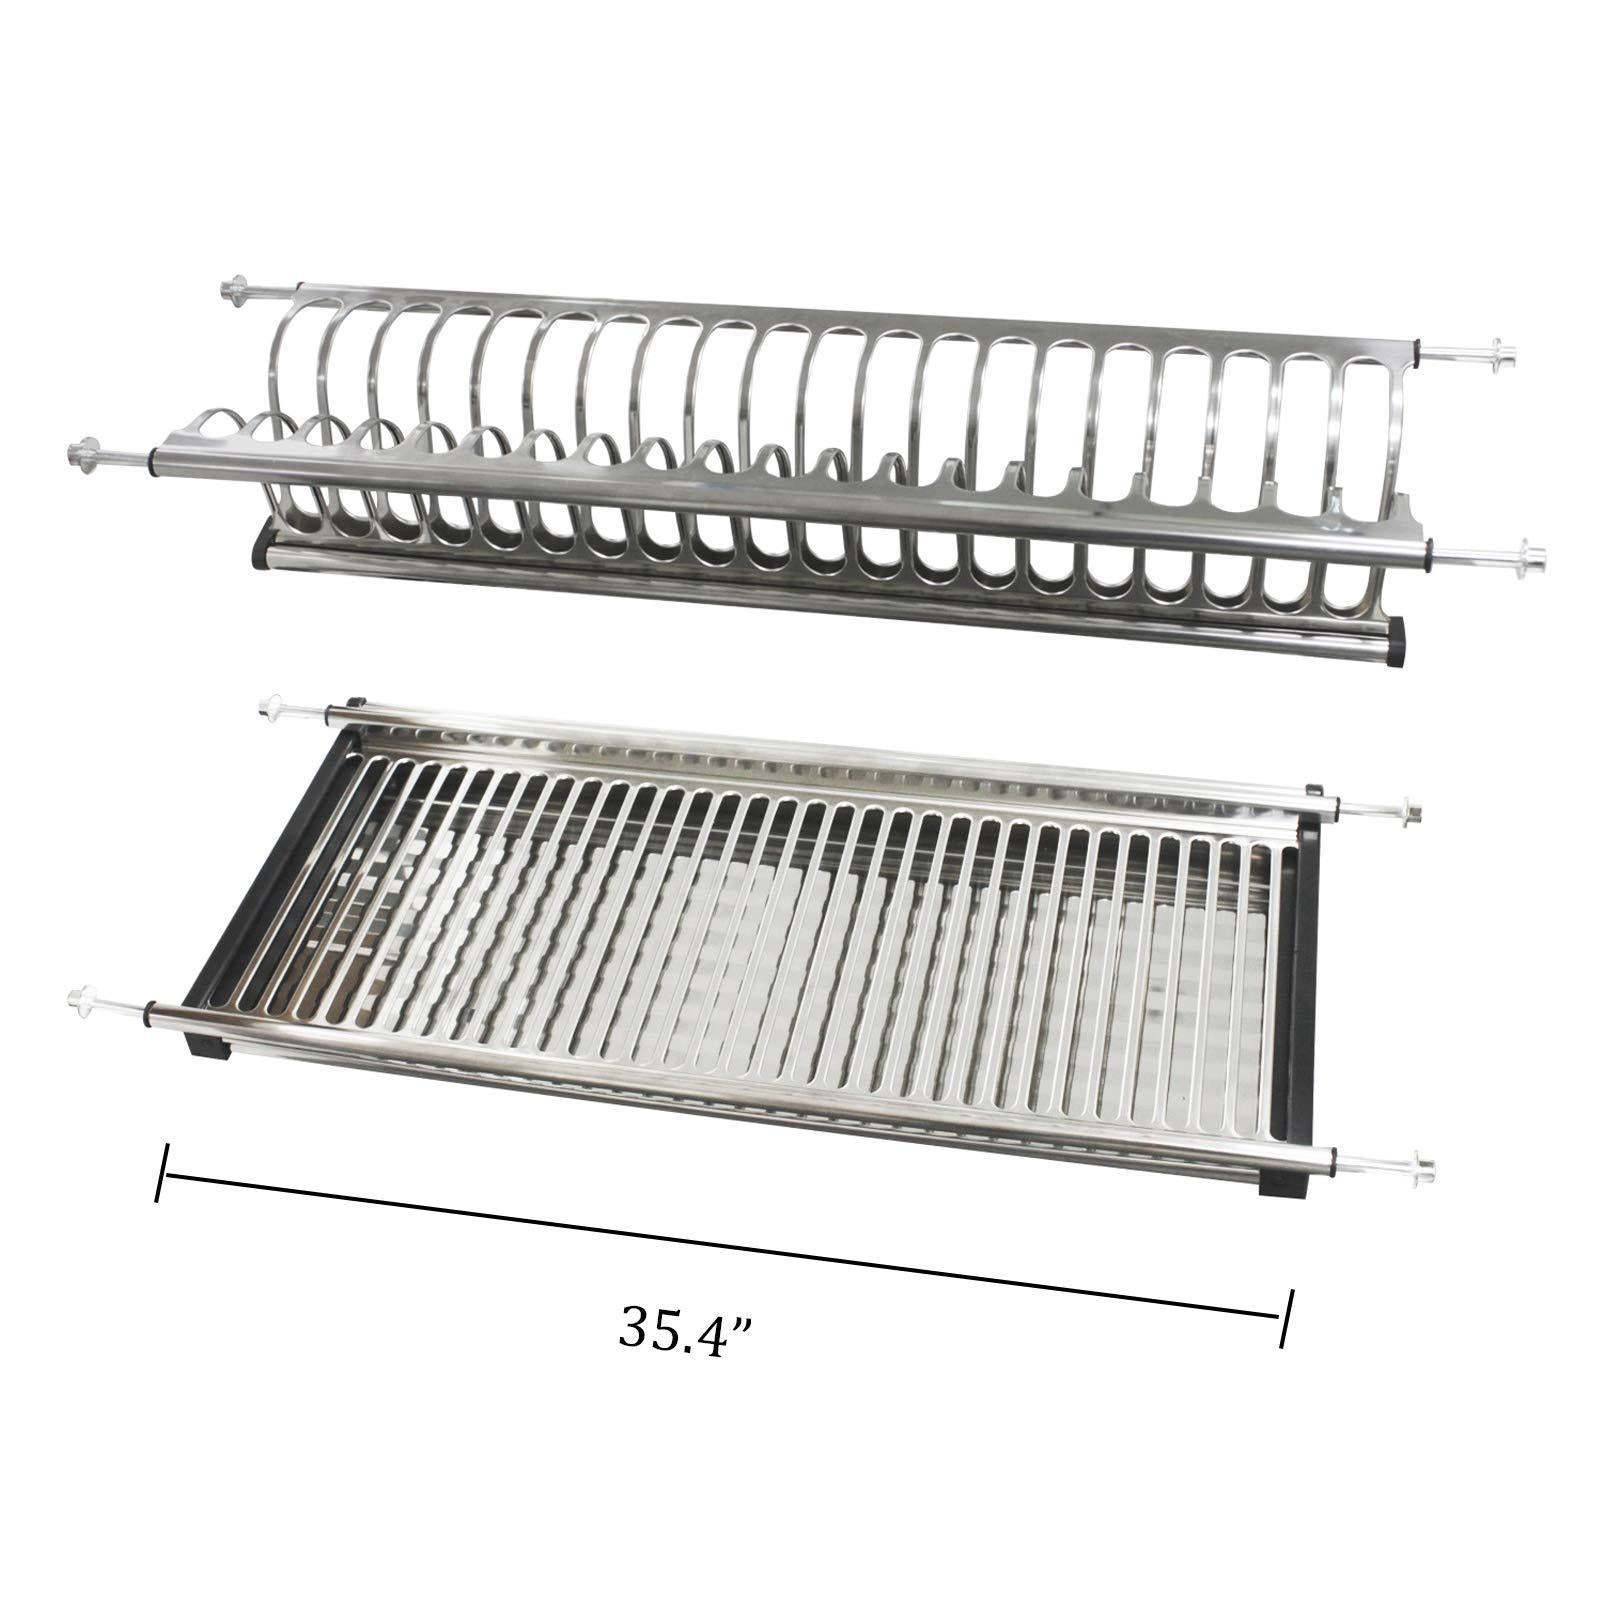 Buy now modern 2 tier kitchen folding dish drying dryer rack 35 4 for cabinet stainless steel drainer plate bowl storage organizer holder